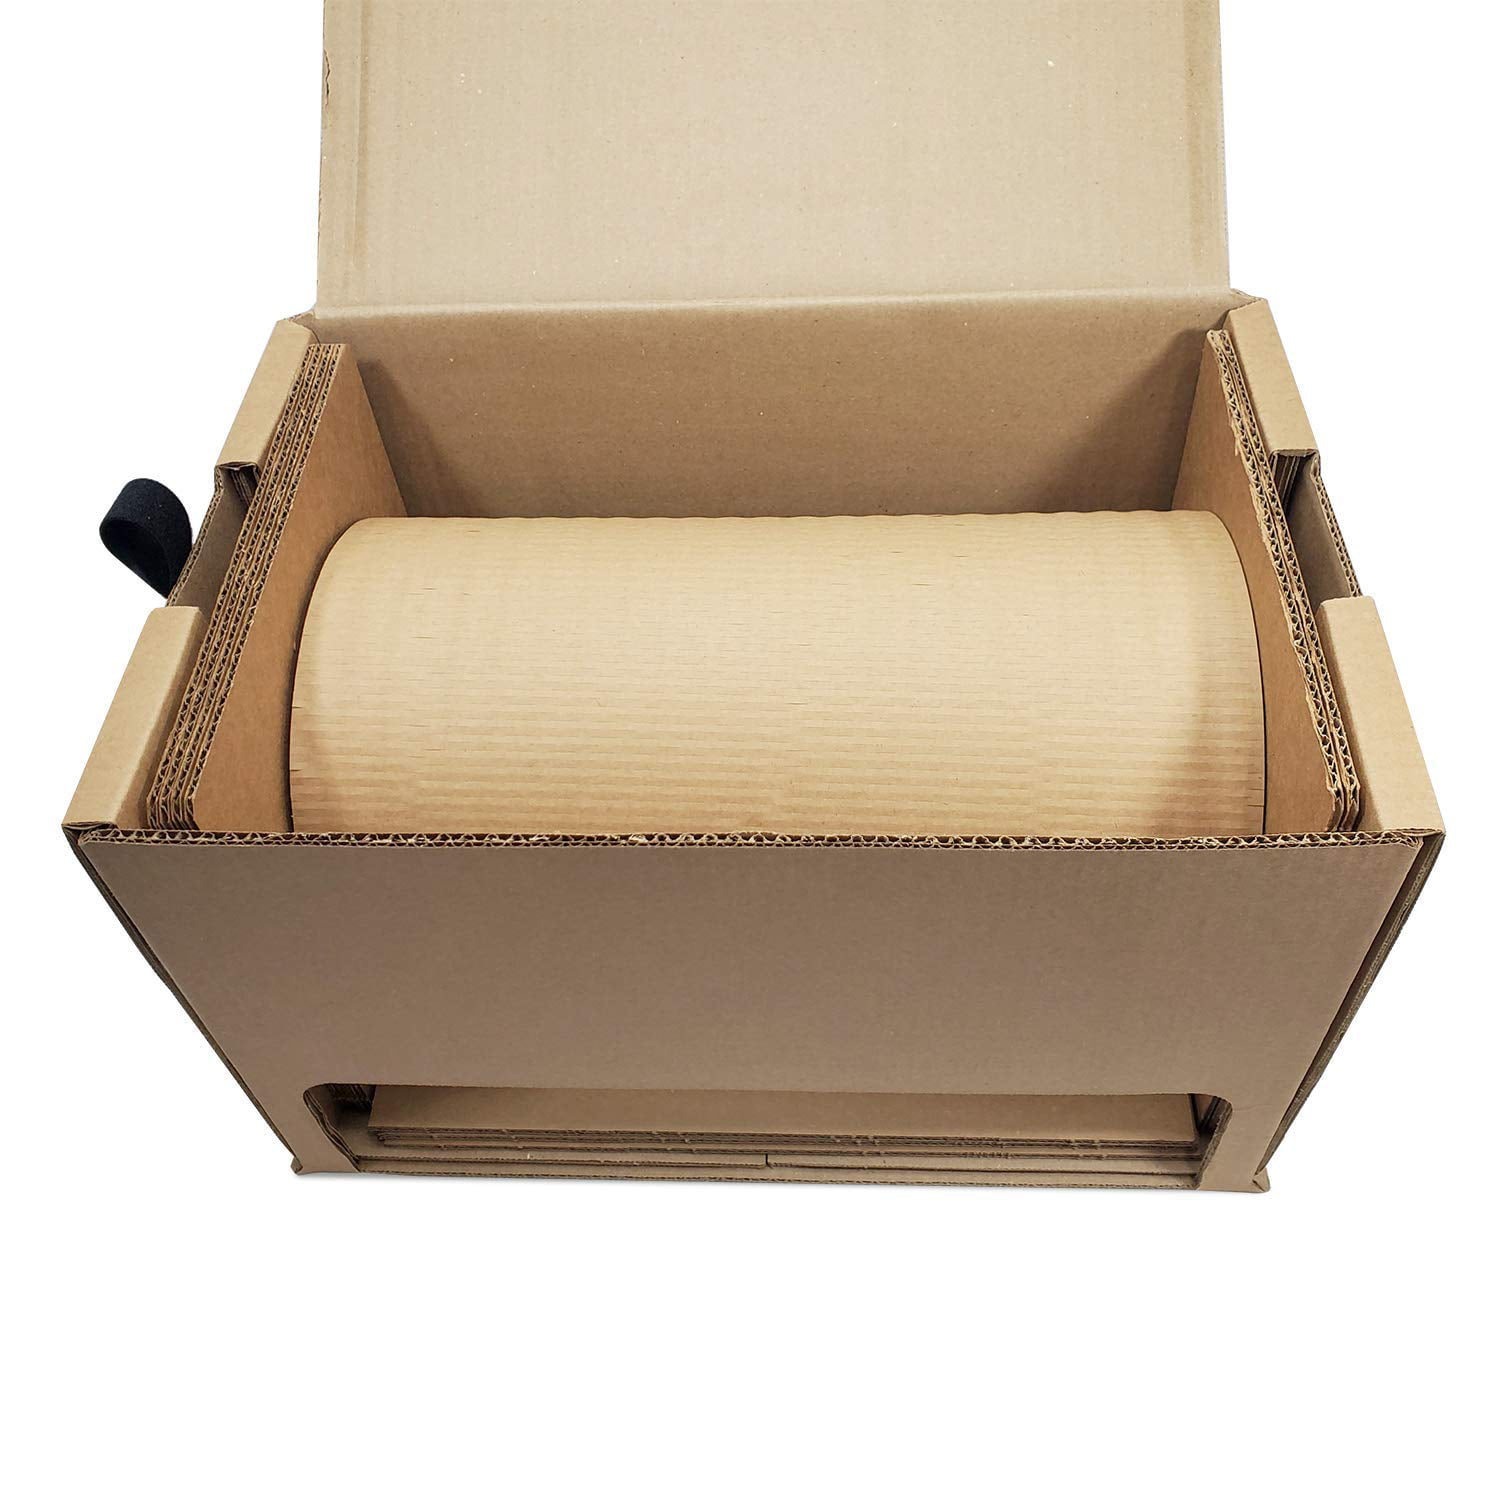 Wrap it Up with Kraft Paper Rolls: Your Guide to Finding the Best Shipping  and Packing Paper - The Boxery Blog, Packaging & Box Tips